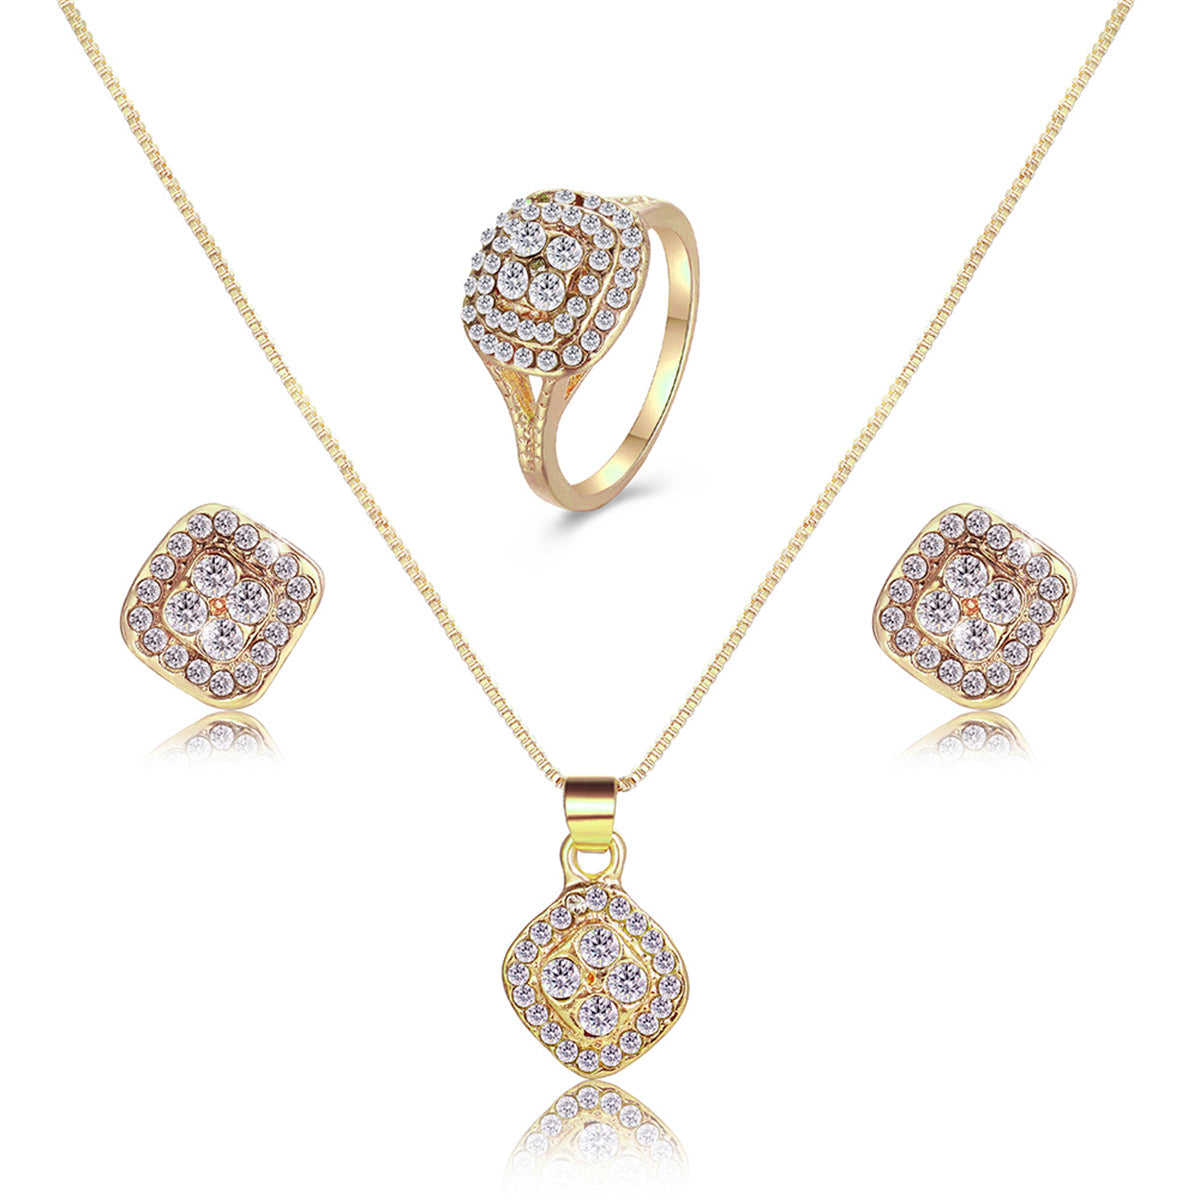 Cubic Zirconia & 18K Gold-Plated Square Pendant Necklace Set